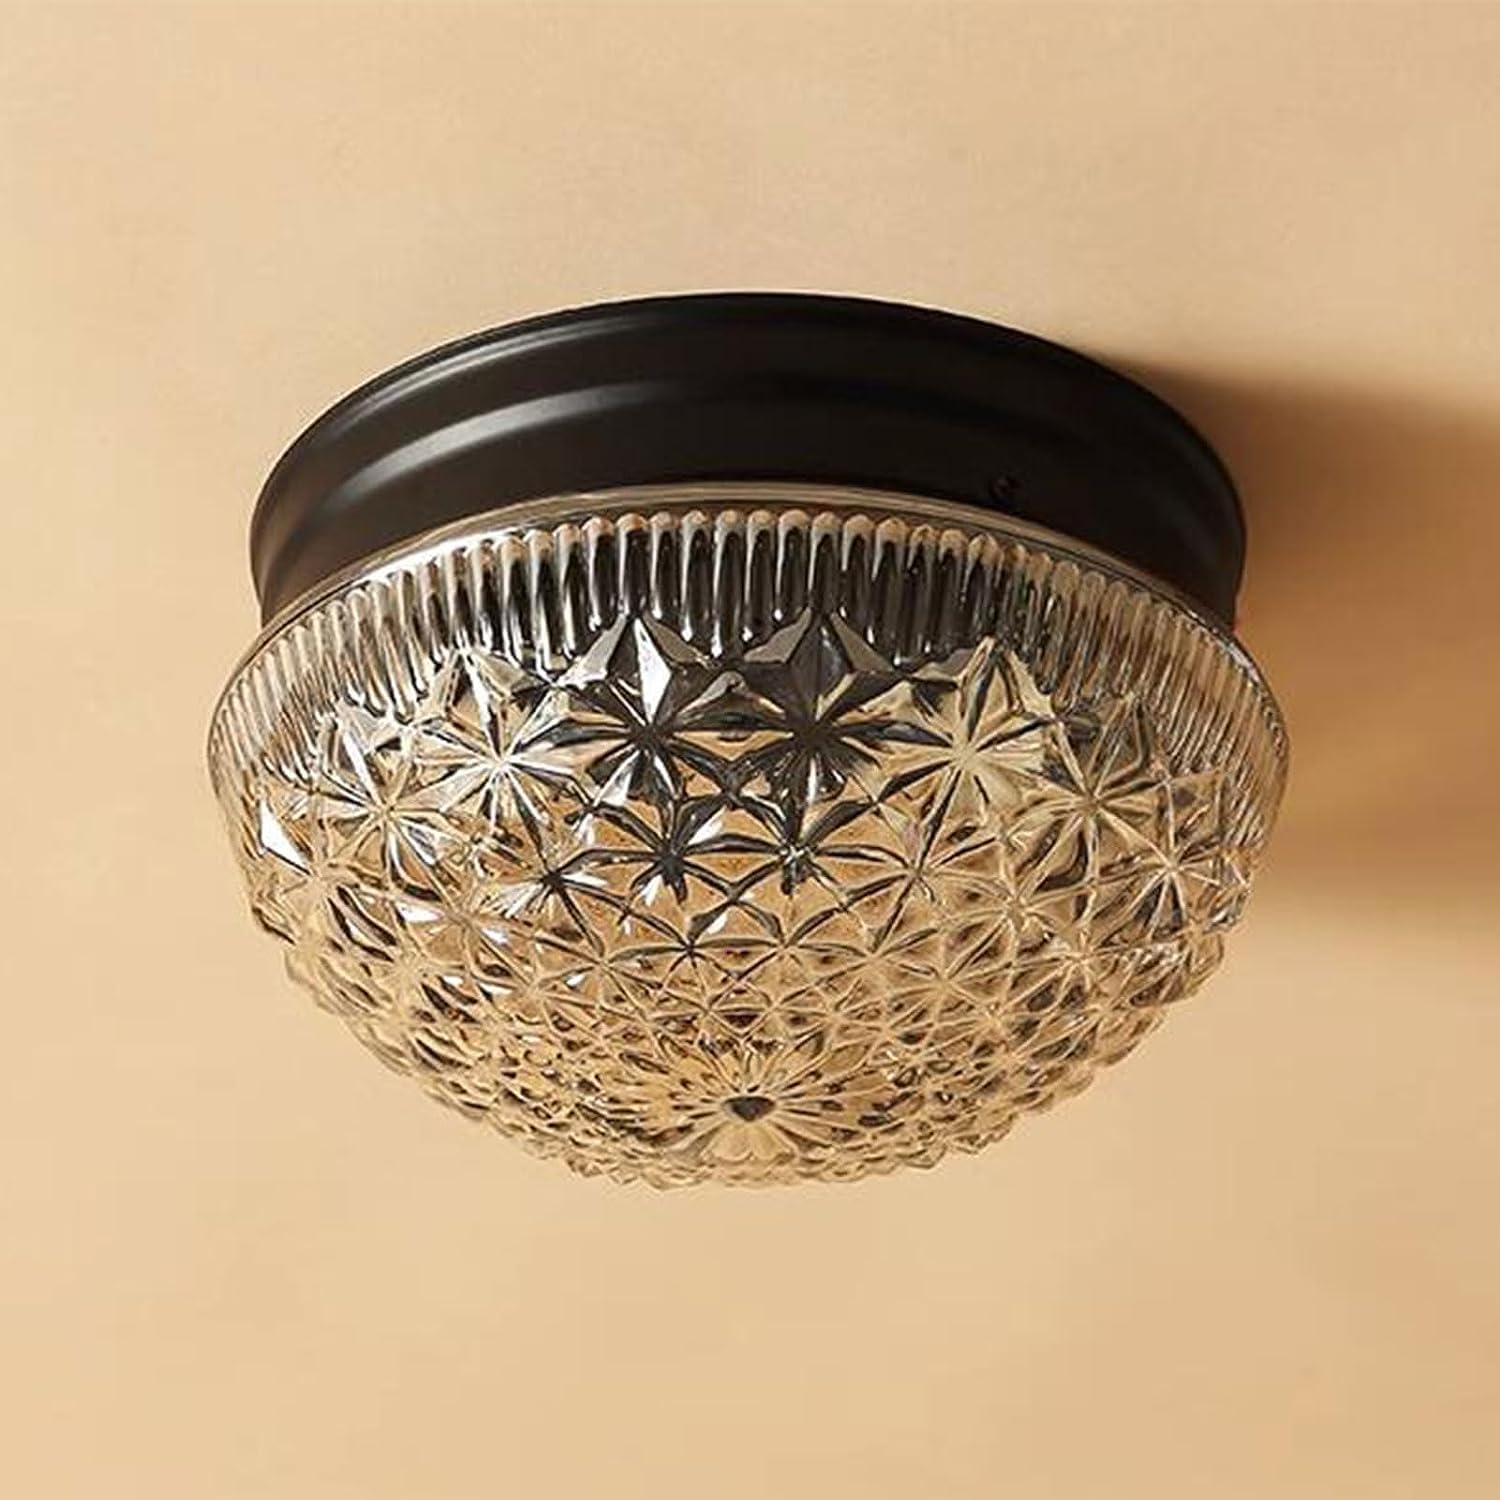 Glass Bowl Bedroom Ceiling Light Fixture -Homwarmy